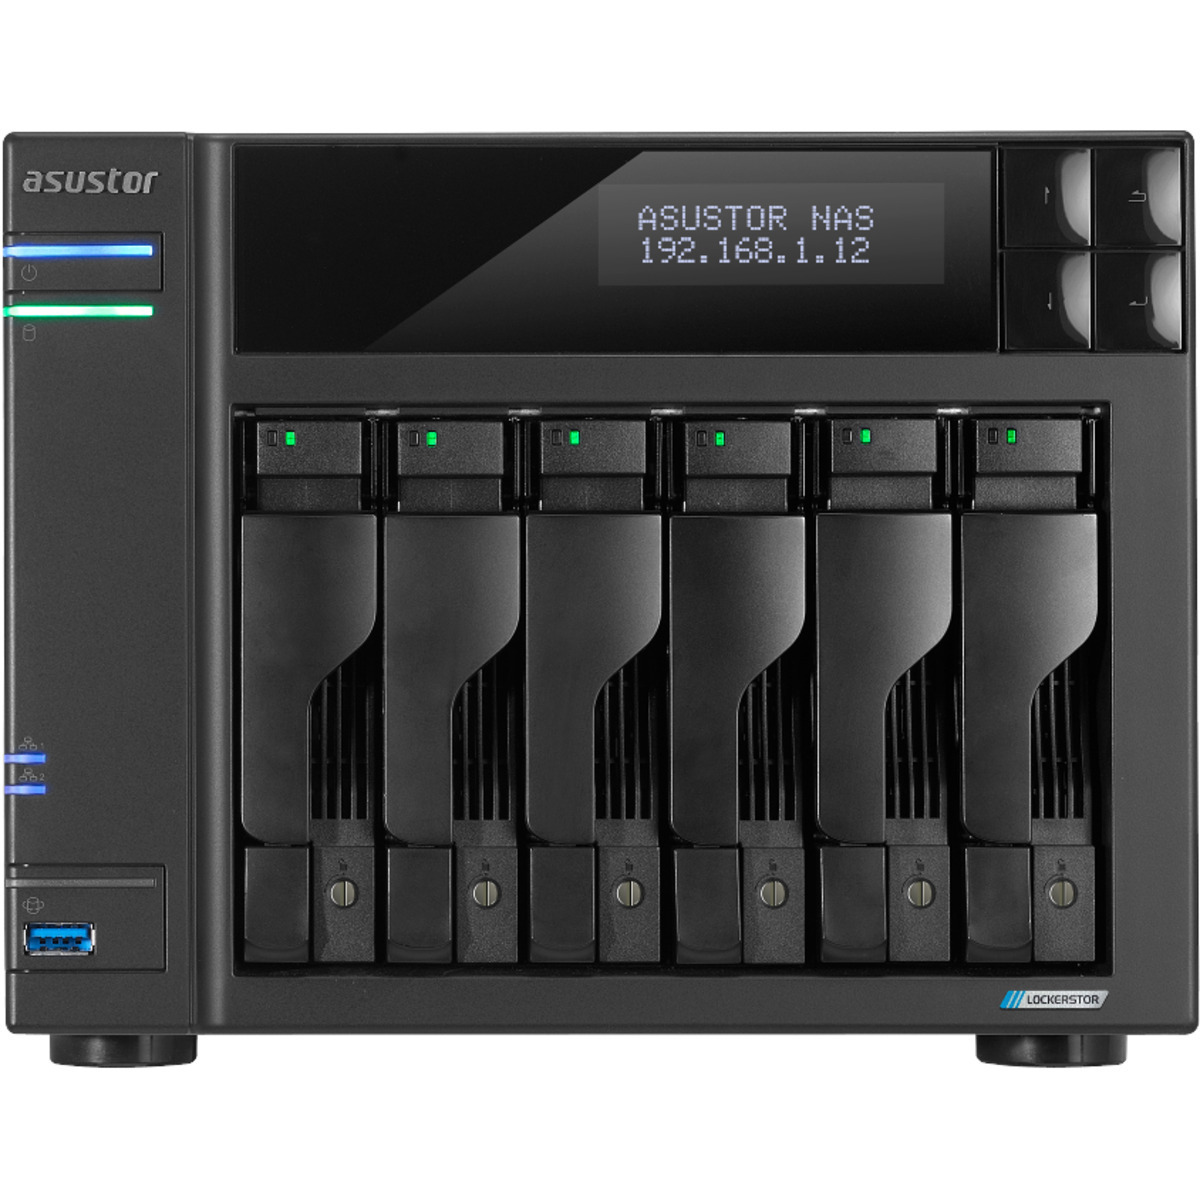 ASUSTOR LOCKERSTOR 6 Gen2 AS6706T 2tb 6-Bay Desktop Multimedia / Power User / Business NAS - Network Attached Storage Device 4x500gb Crucial MX500 CT500MX500SSD1 2.5 560/510MB/s SATA 6Gb/s SSD CONSUMER Class Drives Installed - Burn-In Tested - FREE RAM UPGRADE LOCKERSTOR 6 Gen2 AS6706T